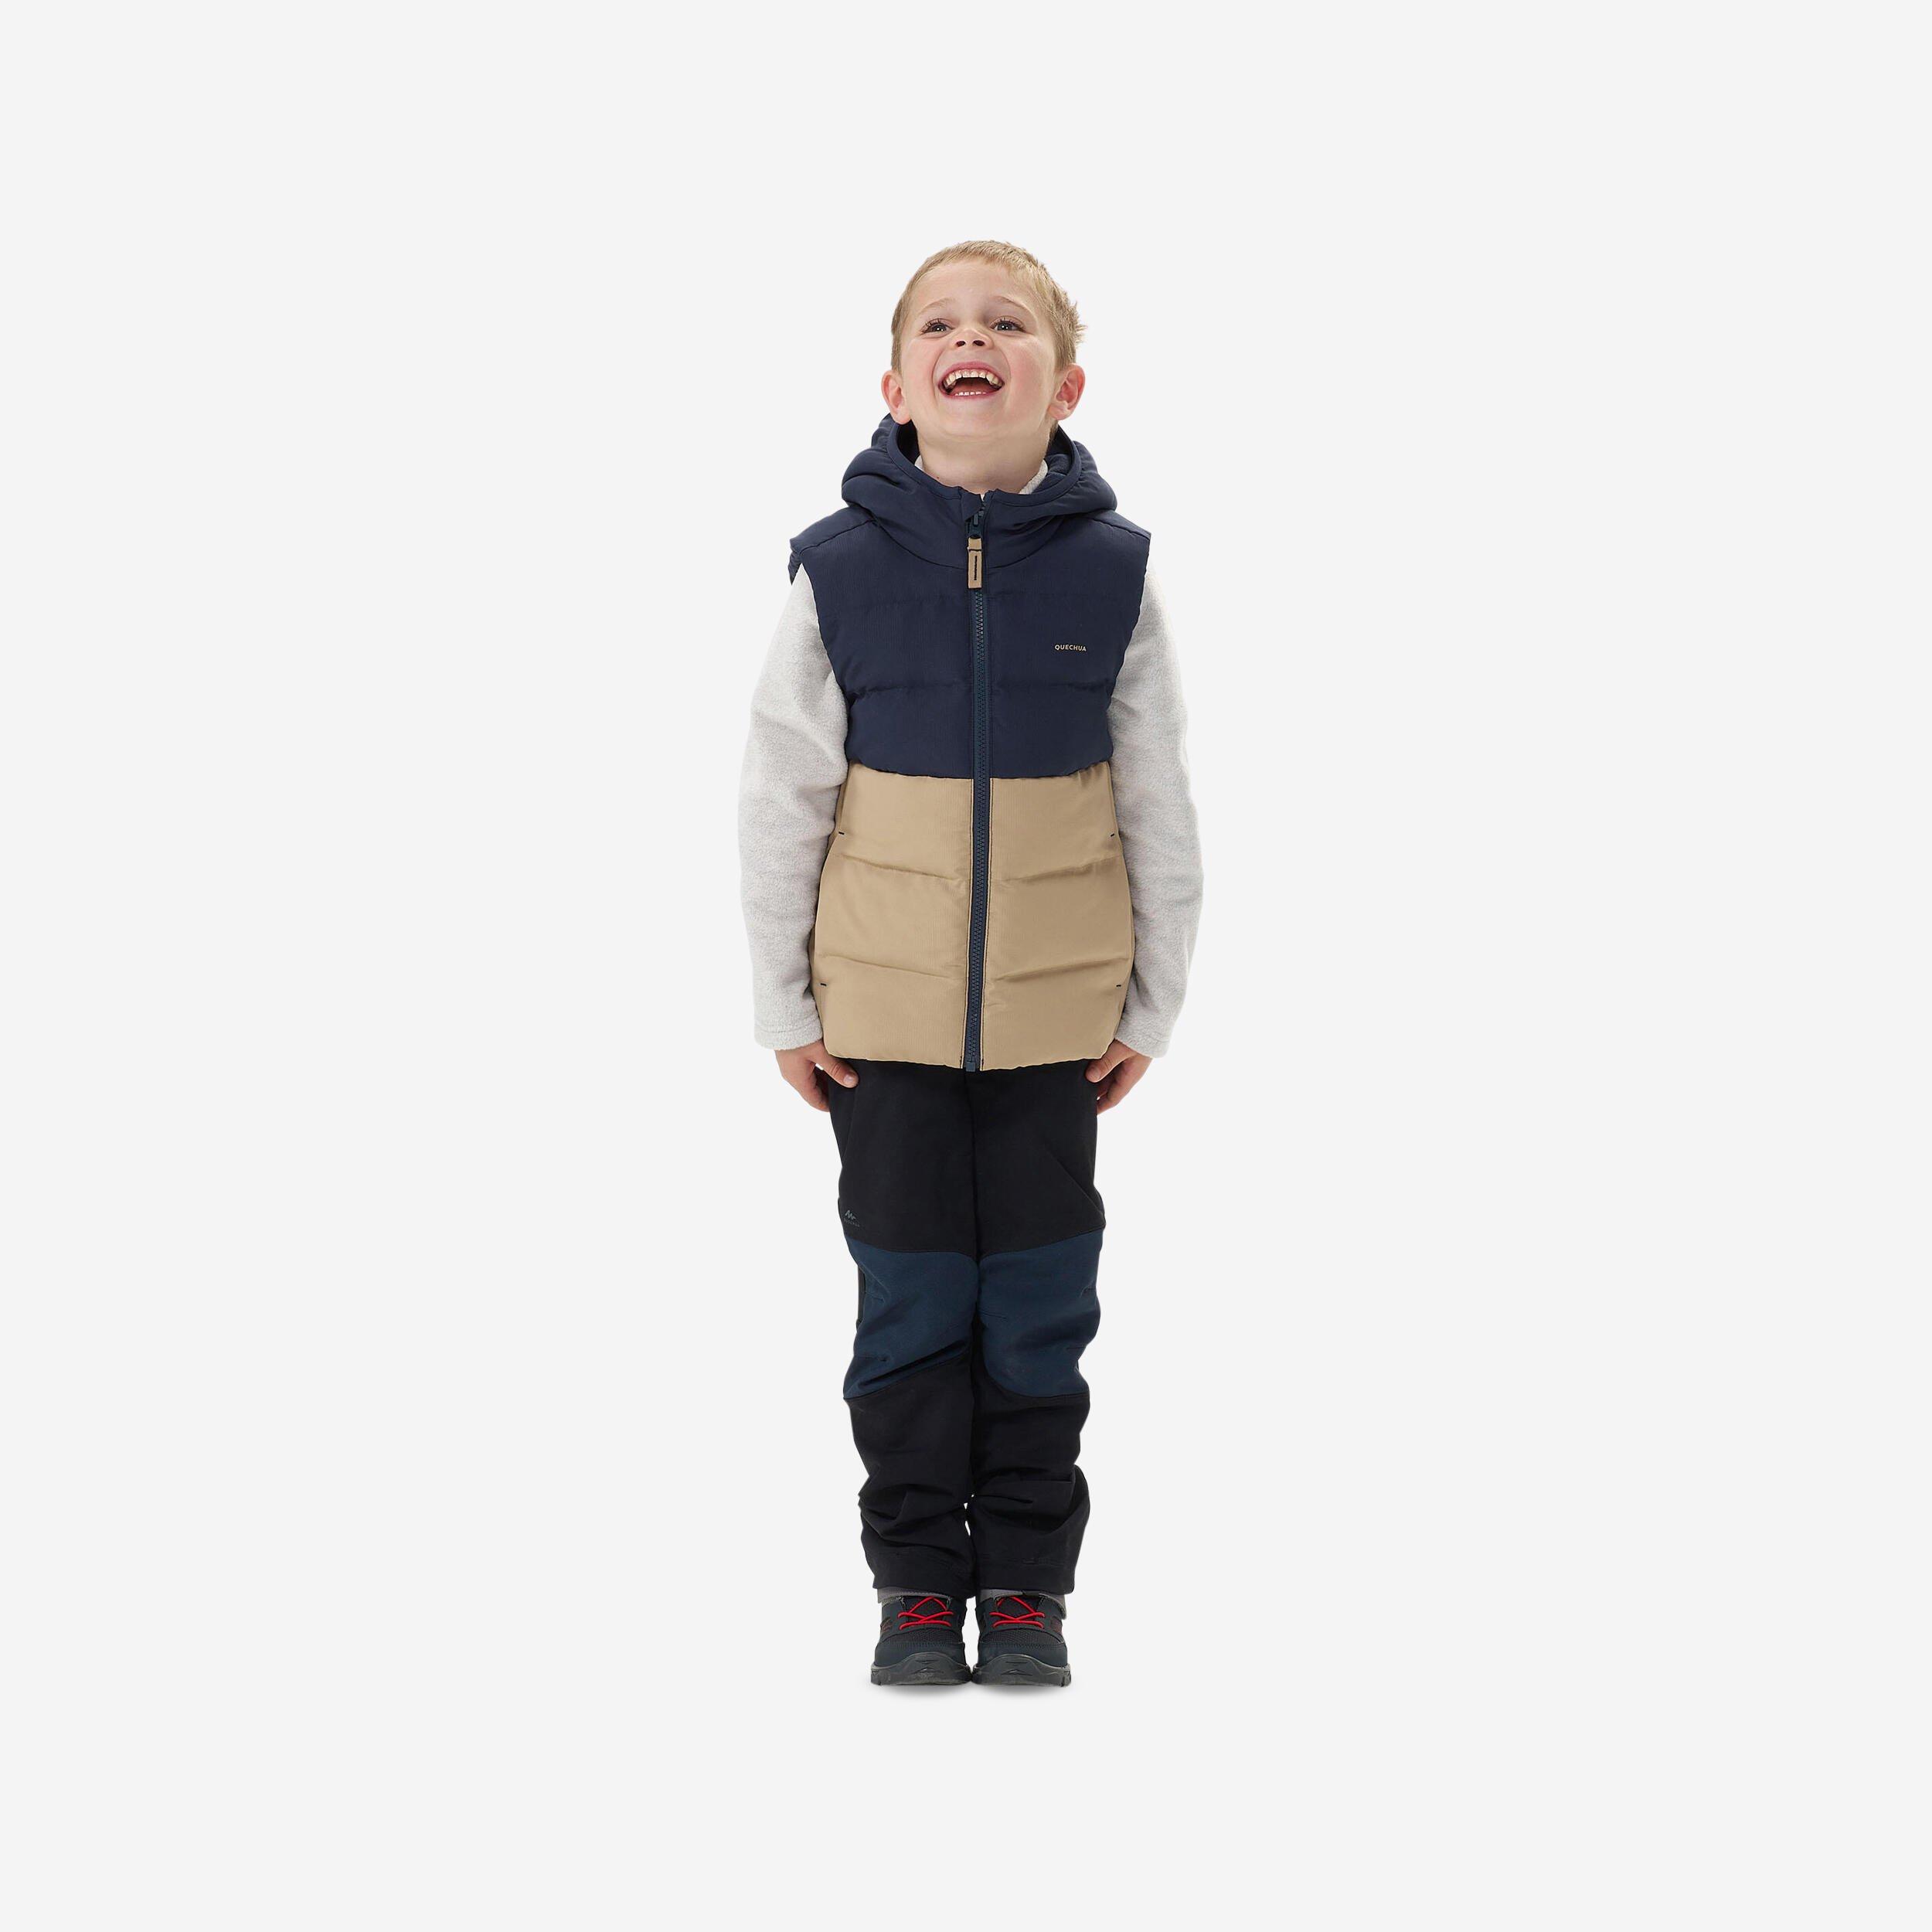 Decathlon Kids’ Padded Hiking Gilet - Aged 2-6 -And